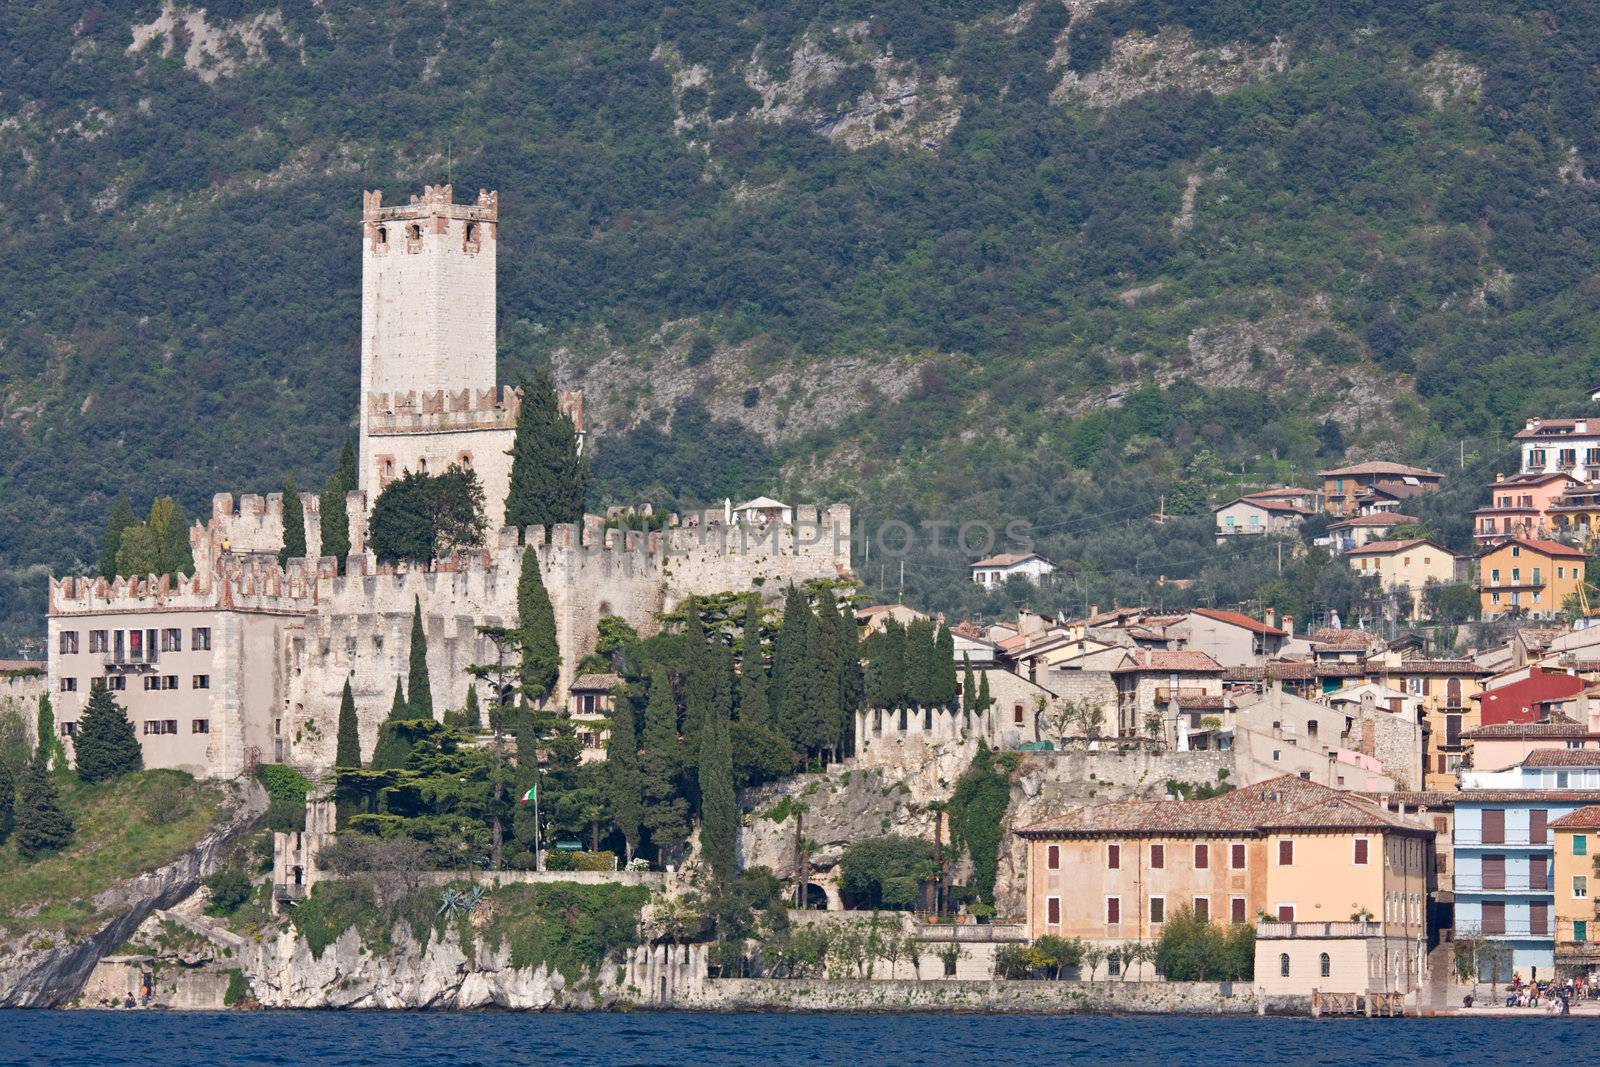 castle of malcesine at garda lake in italy by bernjuer